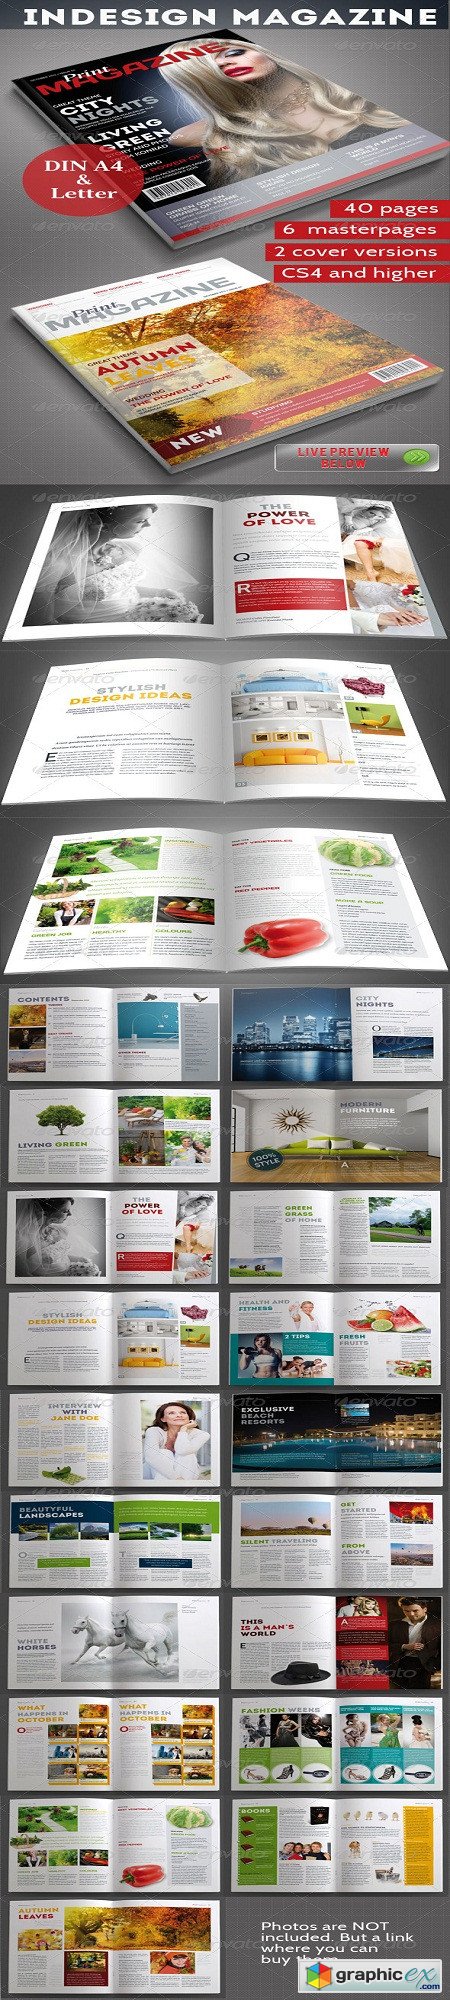 InDesign Magazine Template 40 pages